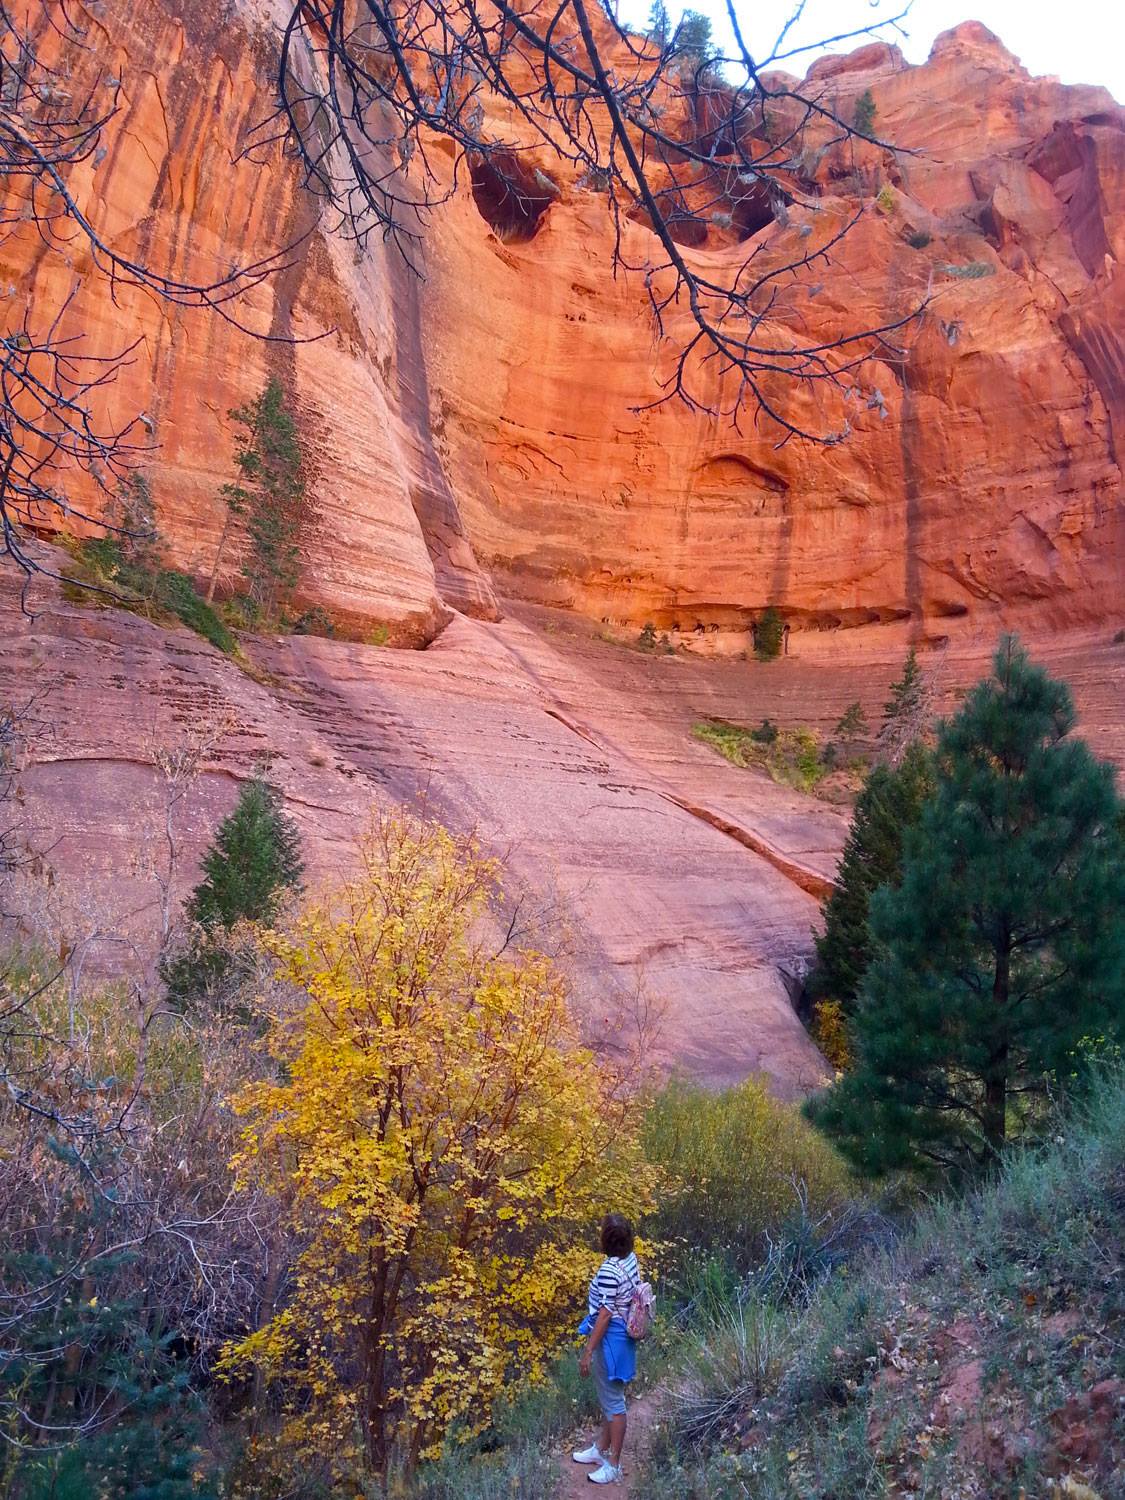 Taylor Creek Zion National Park guided hikes